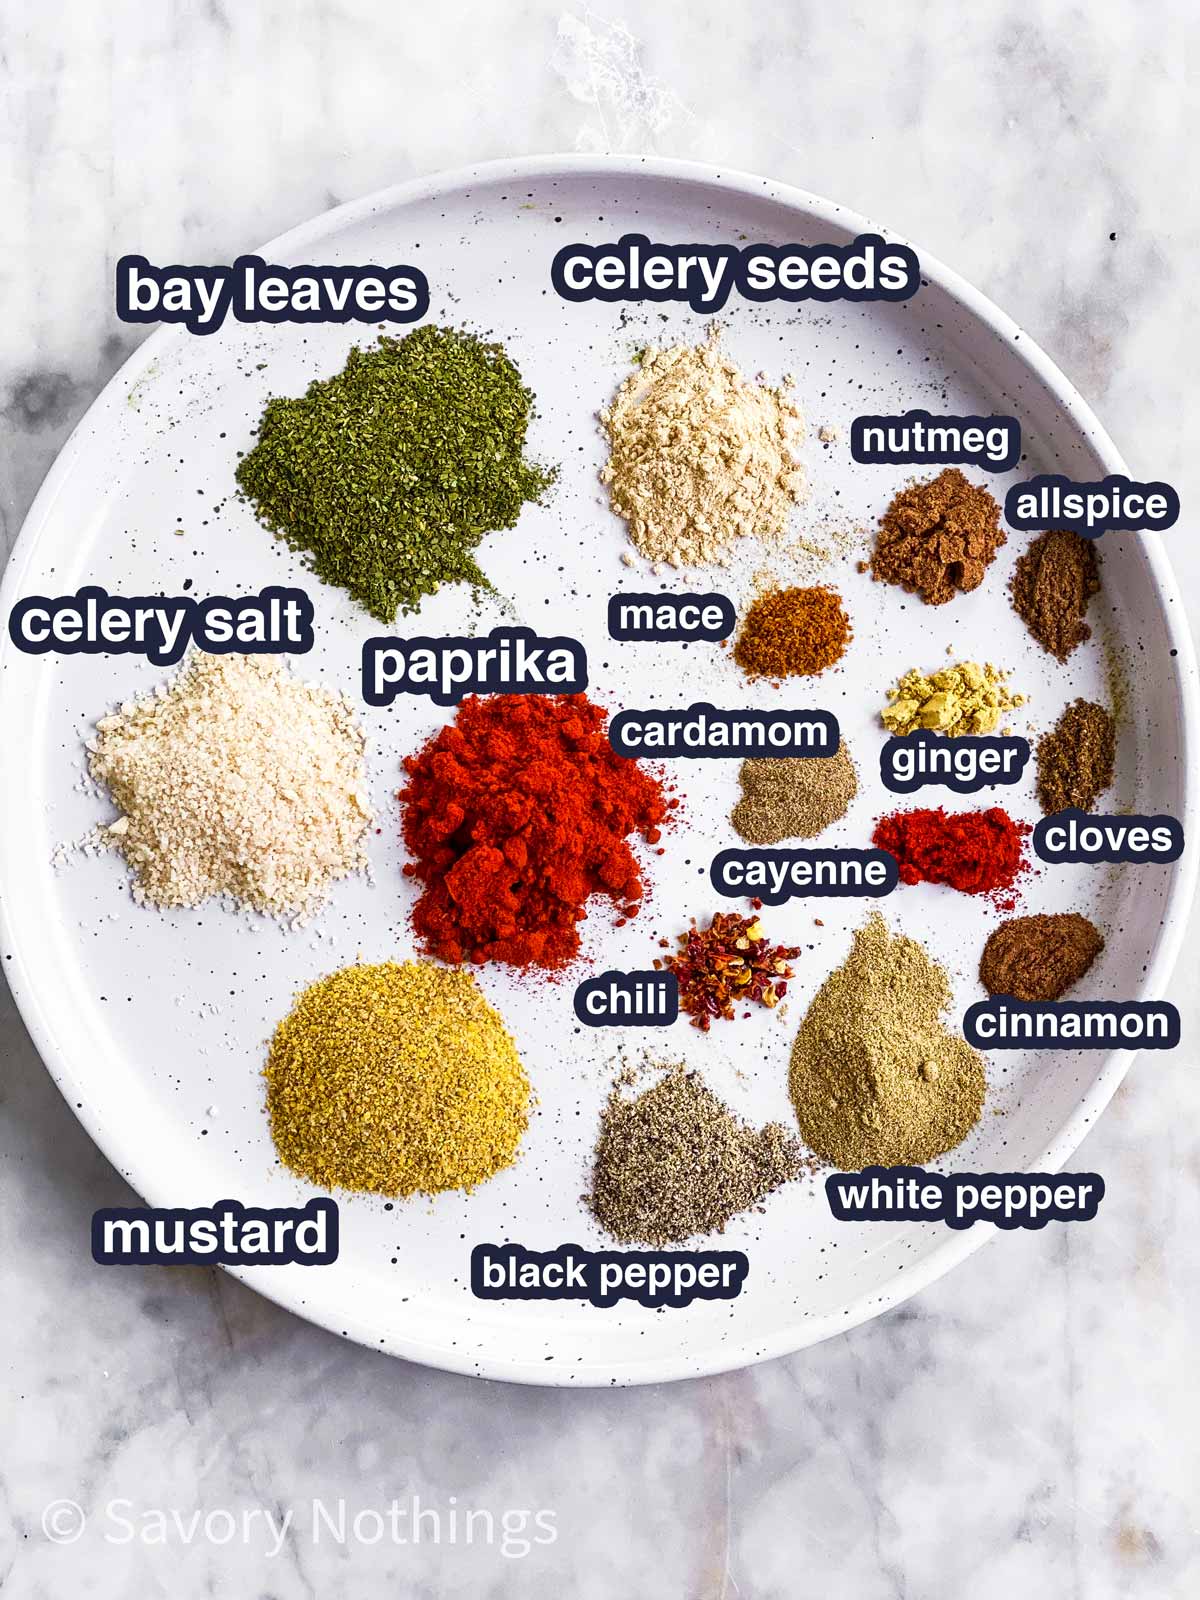 ingredients for copycat old bay seasoning with text labels